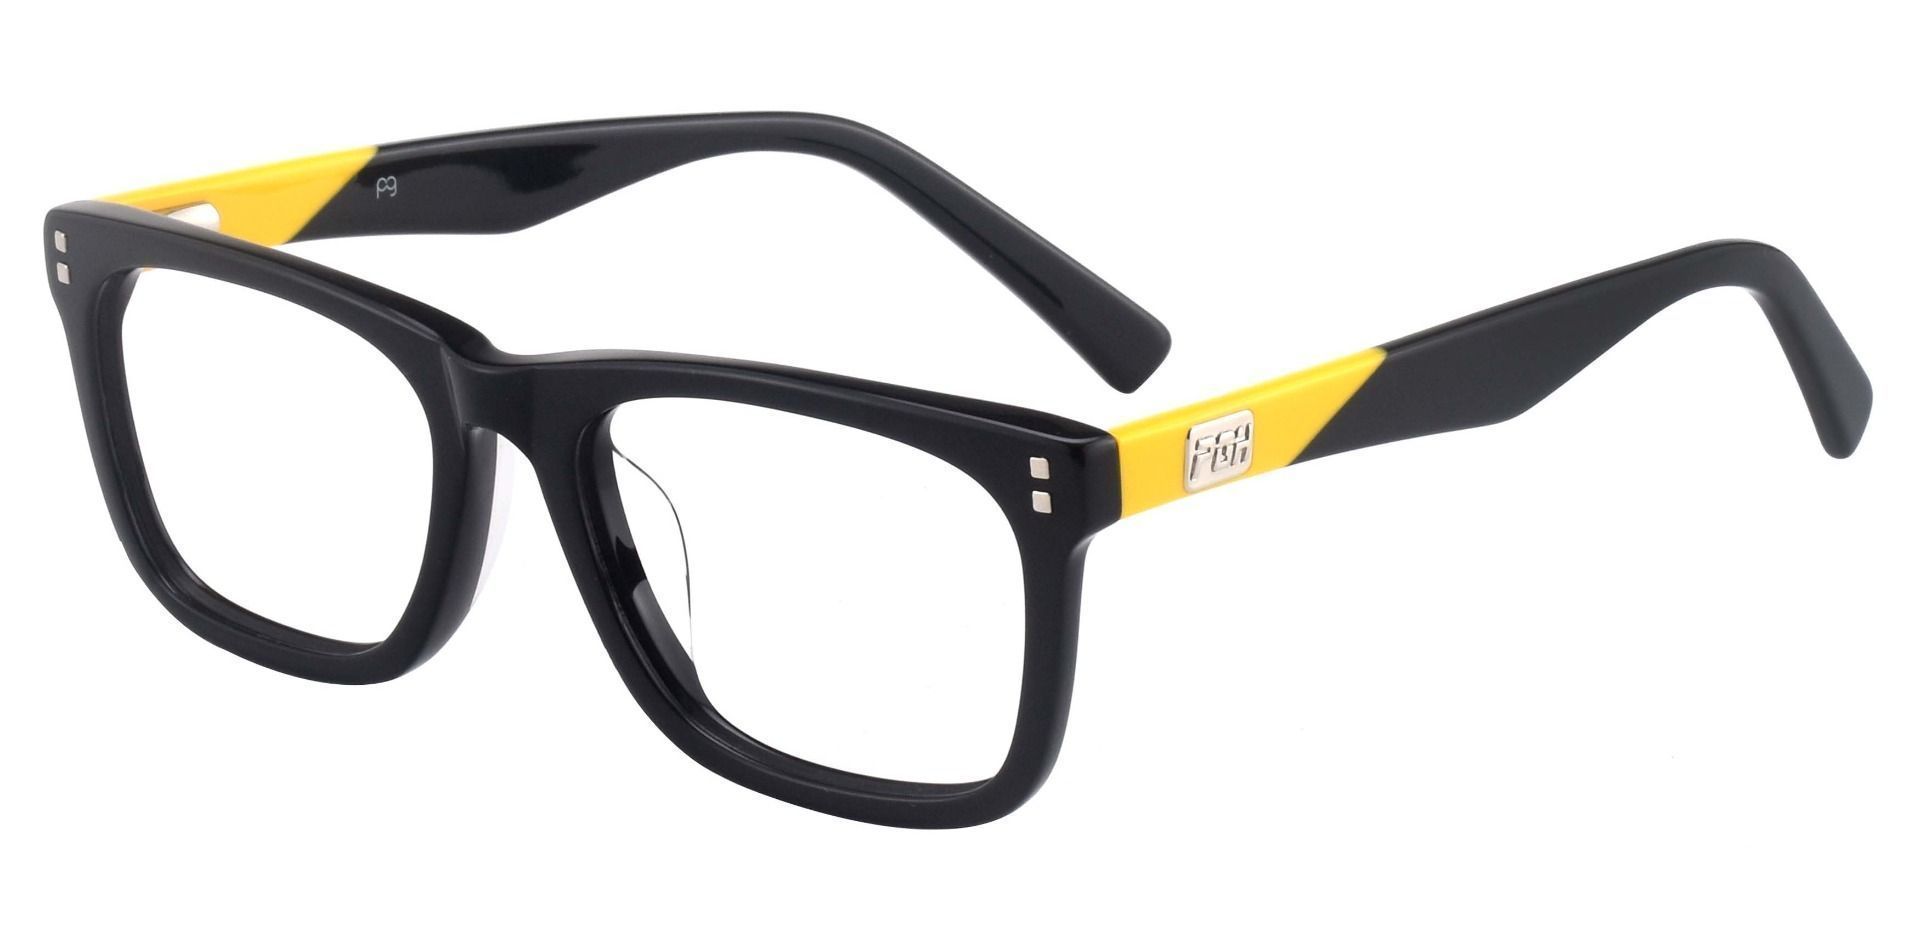 Blitz Rectangle Lined Bifocal Glasses - The Frame Is Black And Yellow